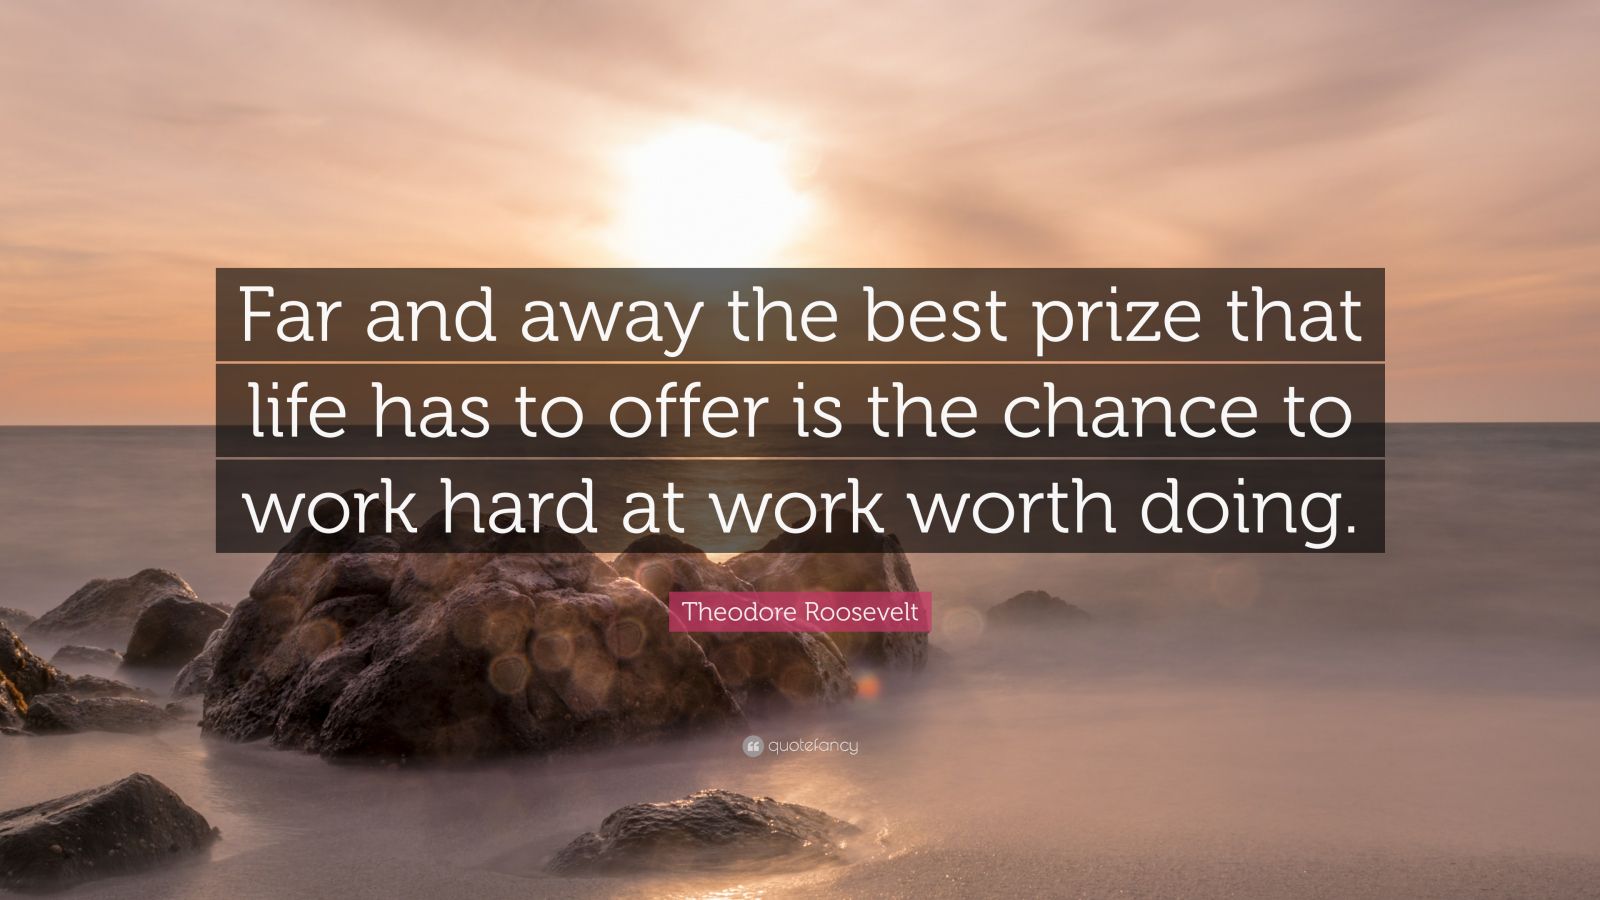 Theodore Roosevelt Quote: “Far and away the best prize that life has to